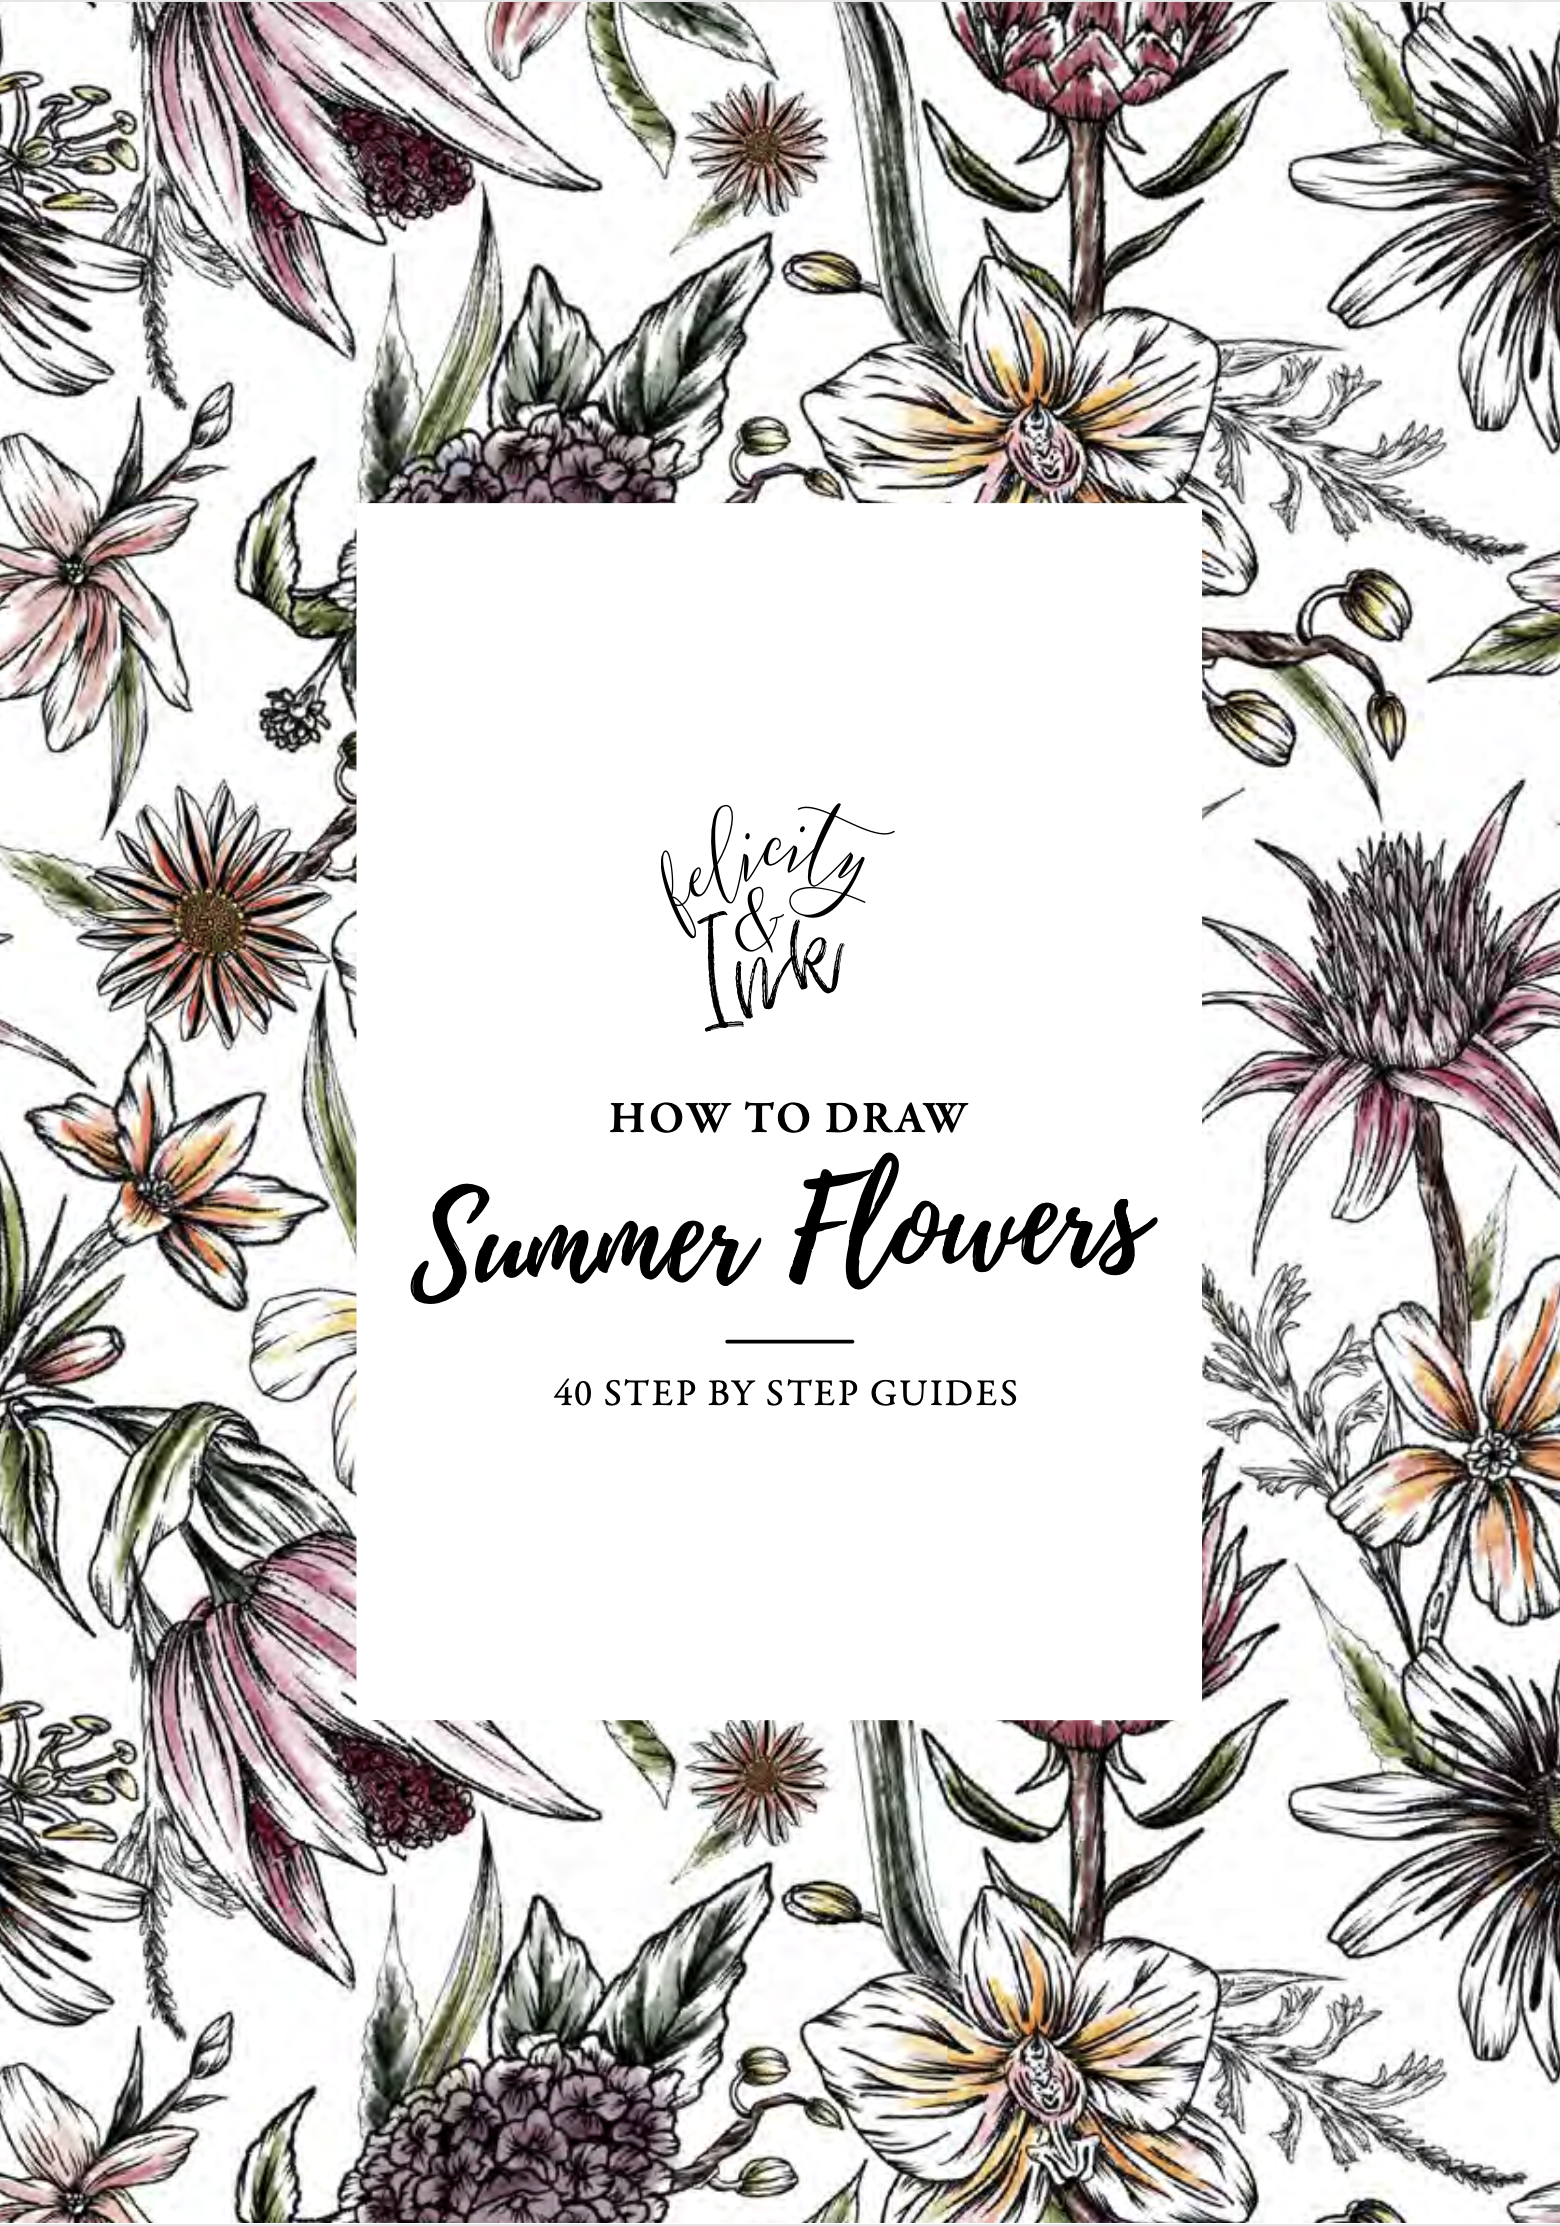 felicity-and-ink-how-to-draw-summer-flowers-step-by-step-ebook.png